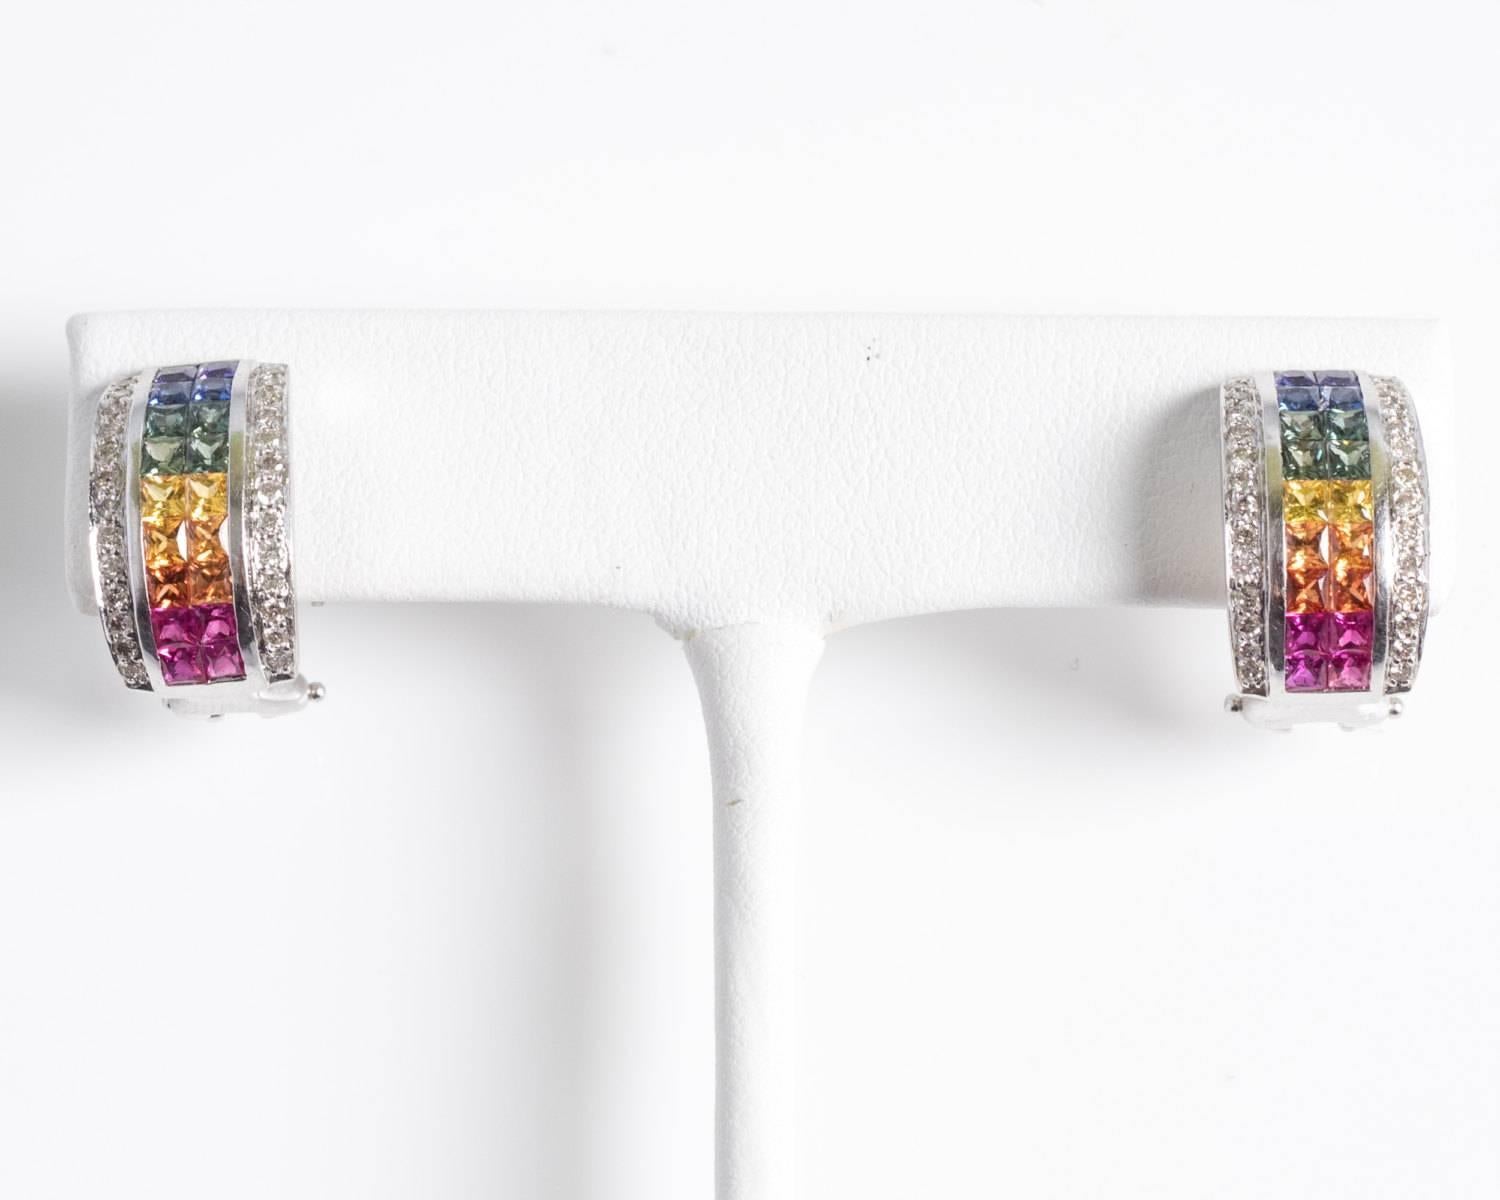 Fine quality vintage earrings from 1990s with beautiful color play to add the perfect statement to any outfit. Features various sapphires, both radiant and vibrant for any occasion. Princess cut sapphires in red, orange, yellow, green, blue and